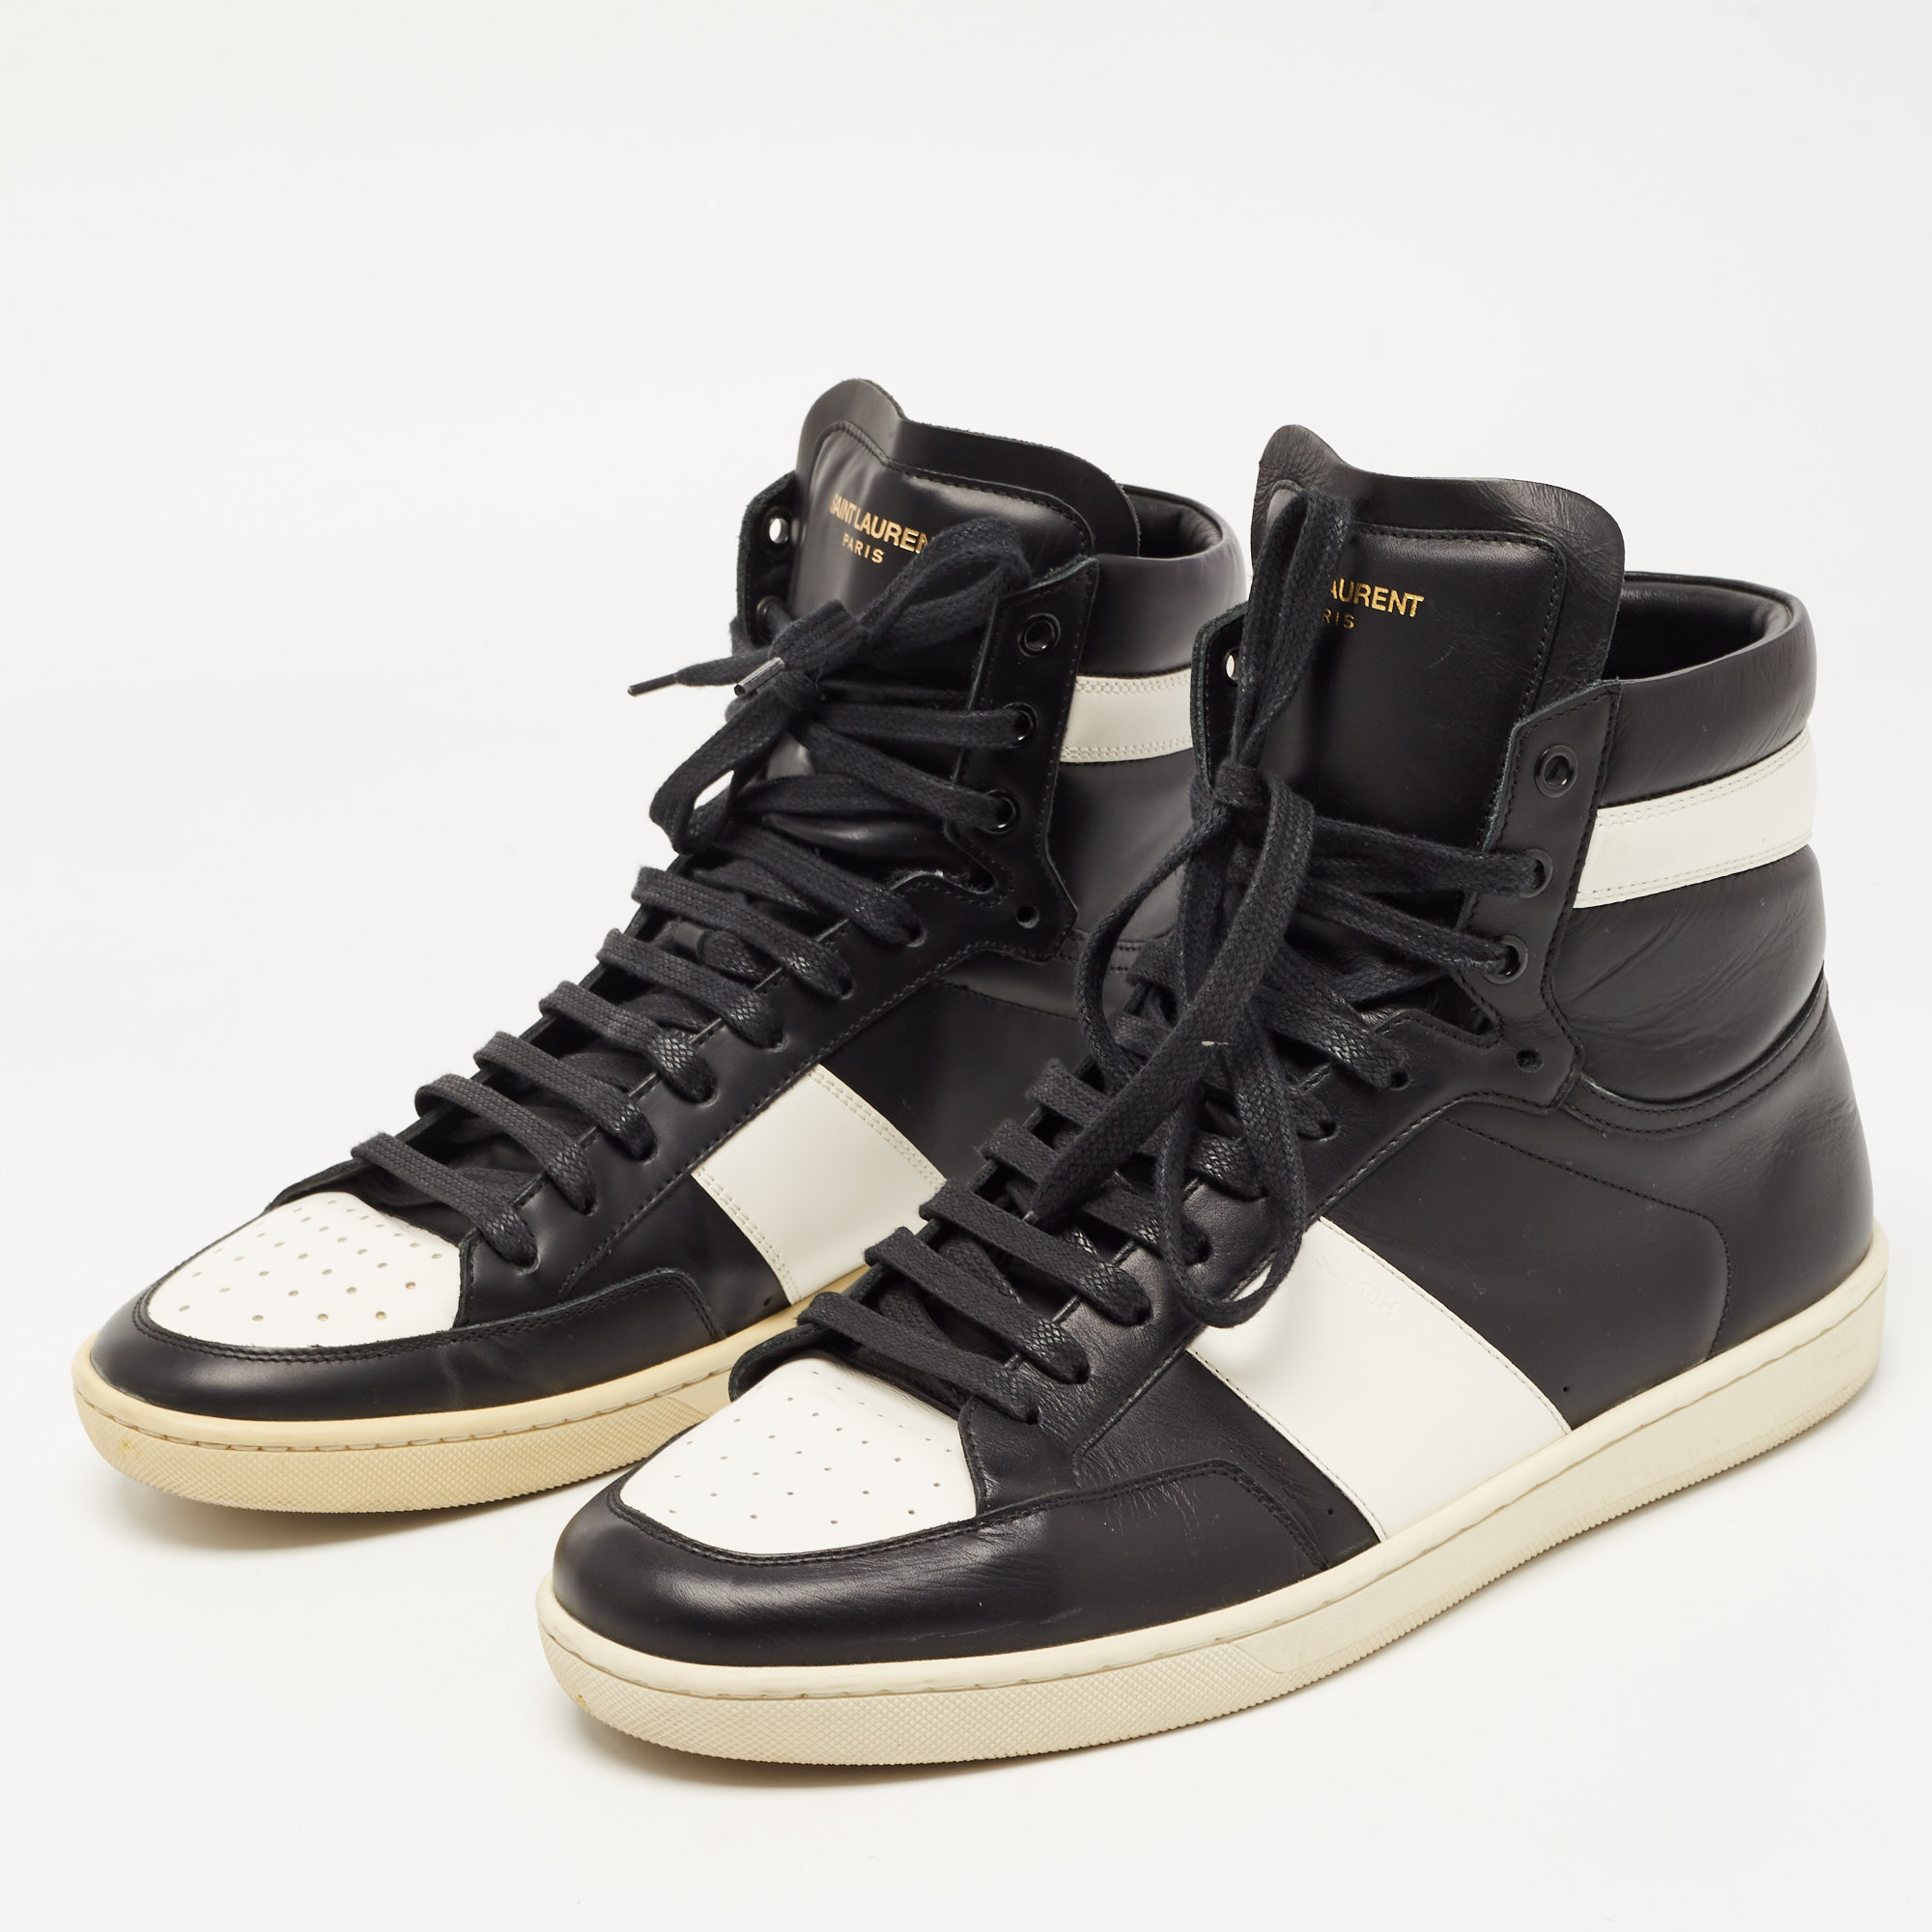 

Saint Laurent Black/White Leather Court Classic High Top Sneakers Size